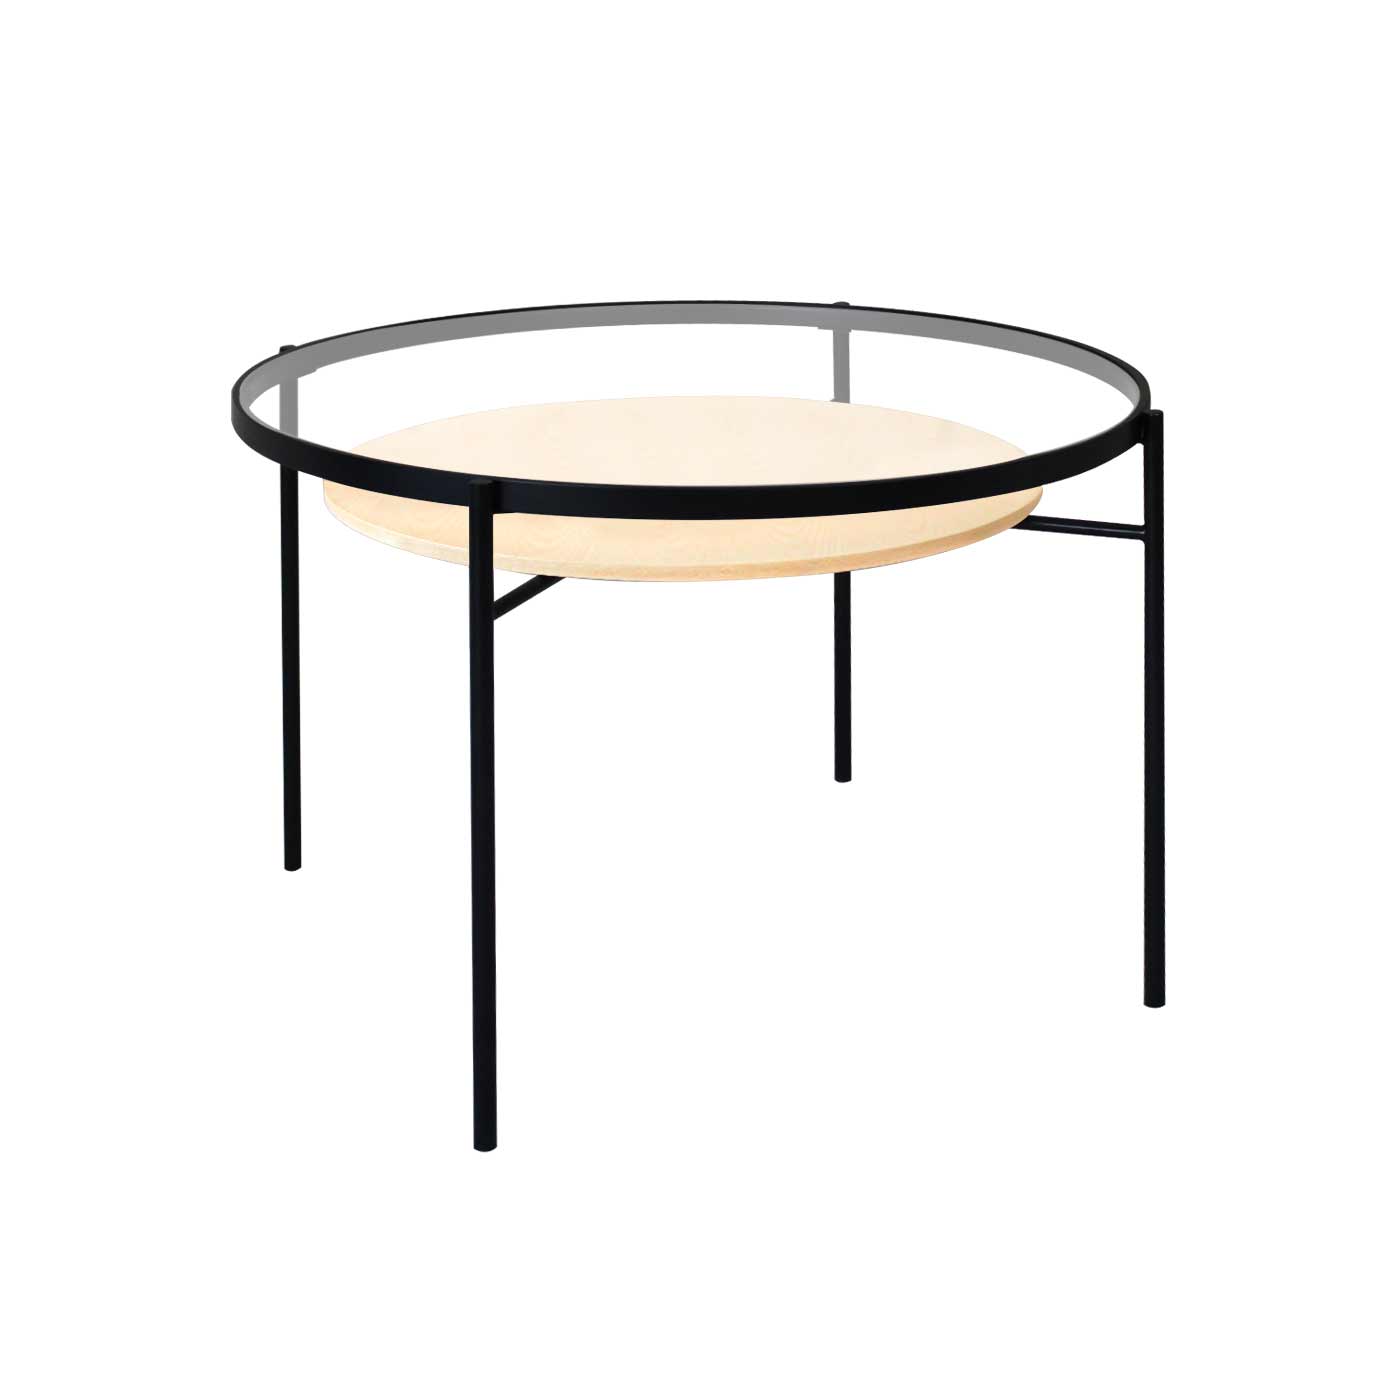 Sheffield Glass Round Conference Table